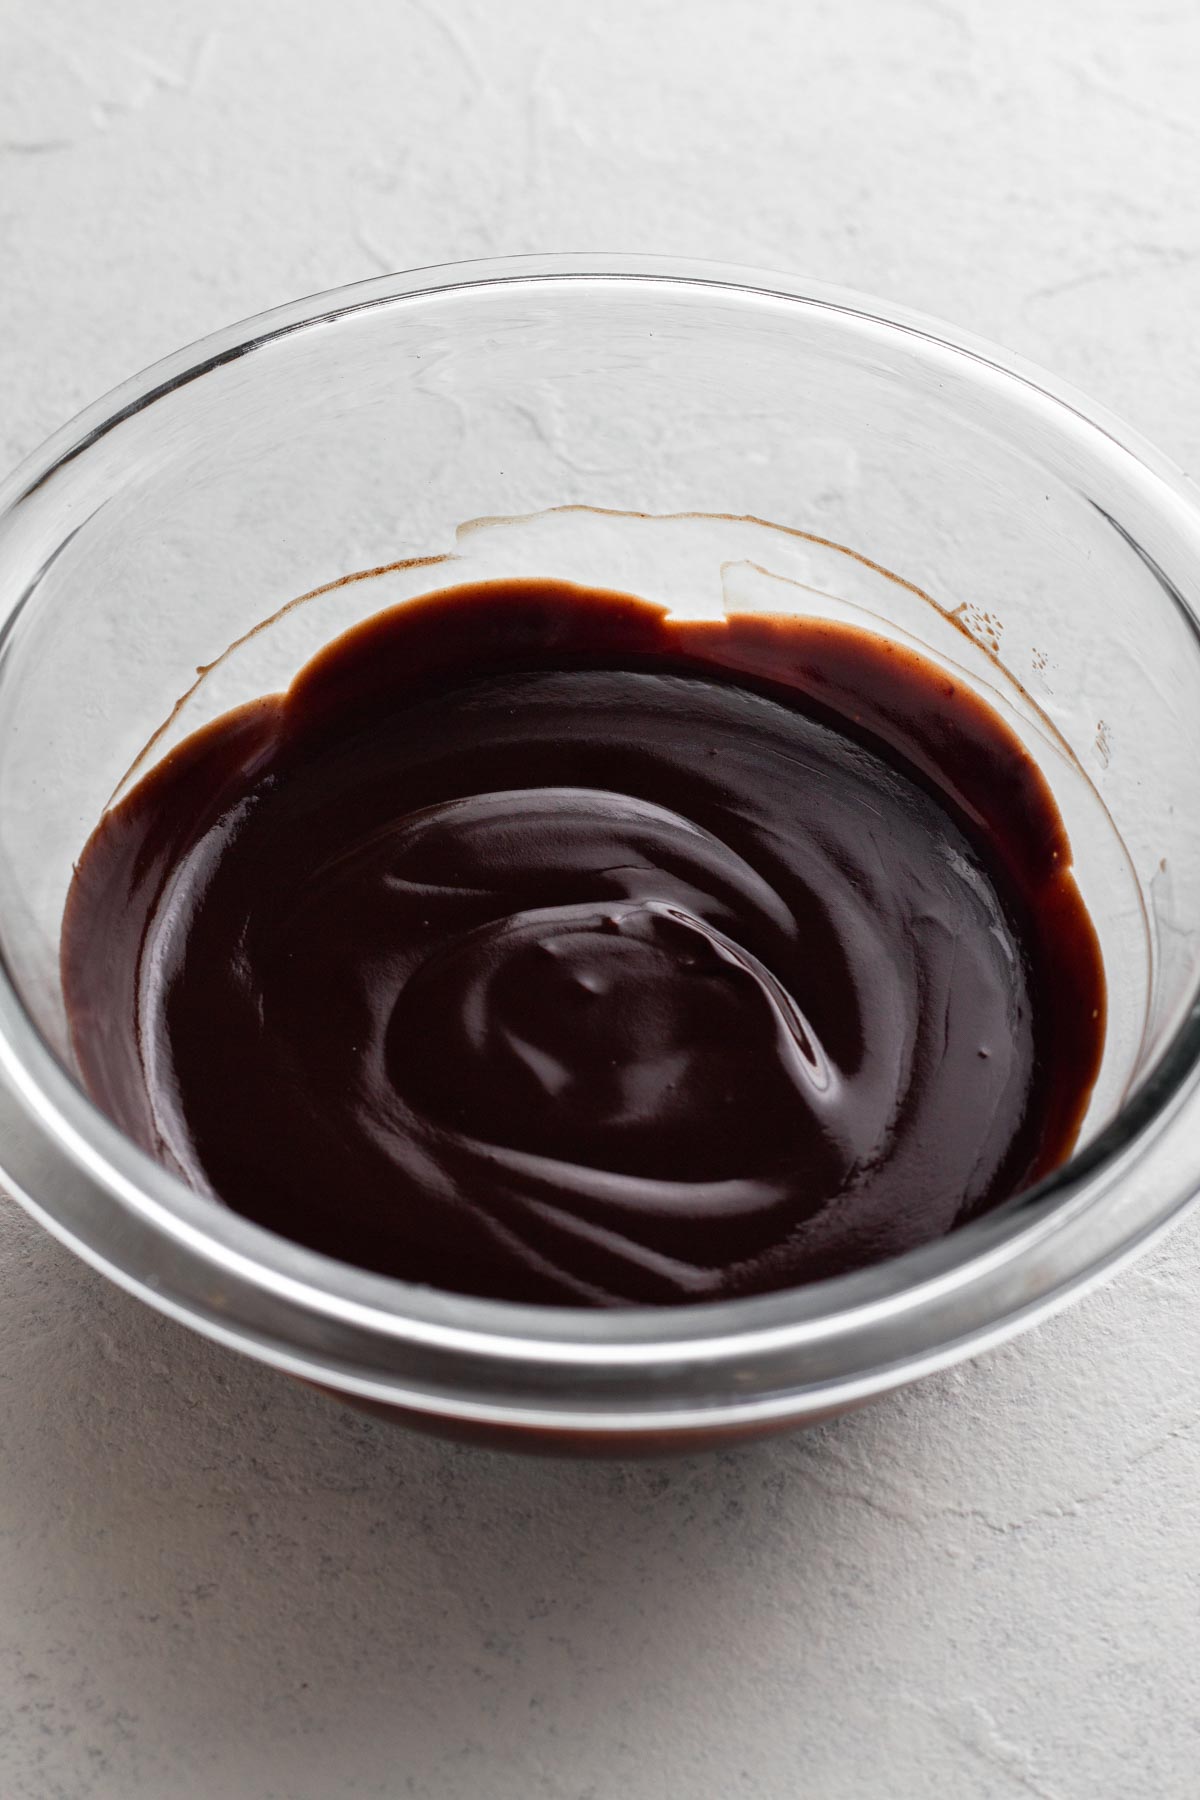 Angled view of chocolate ganache in a glass mixing bowl on a white surface.